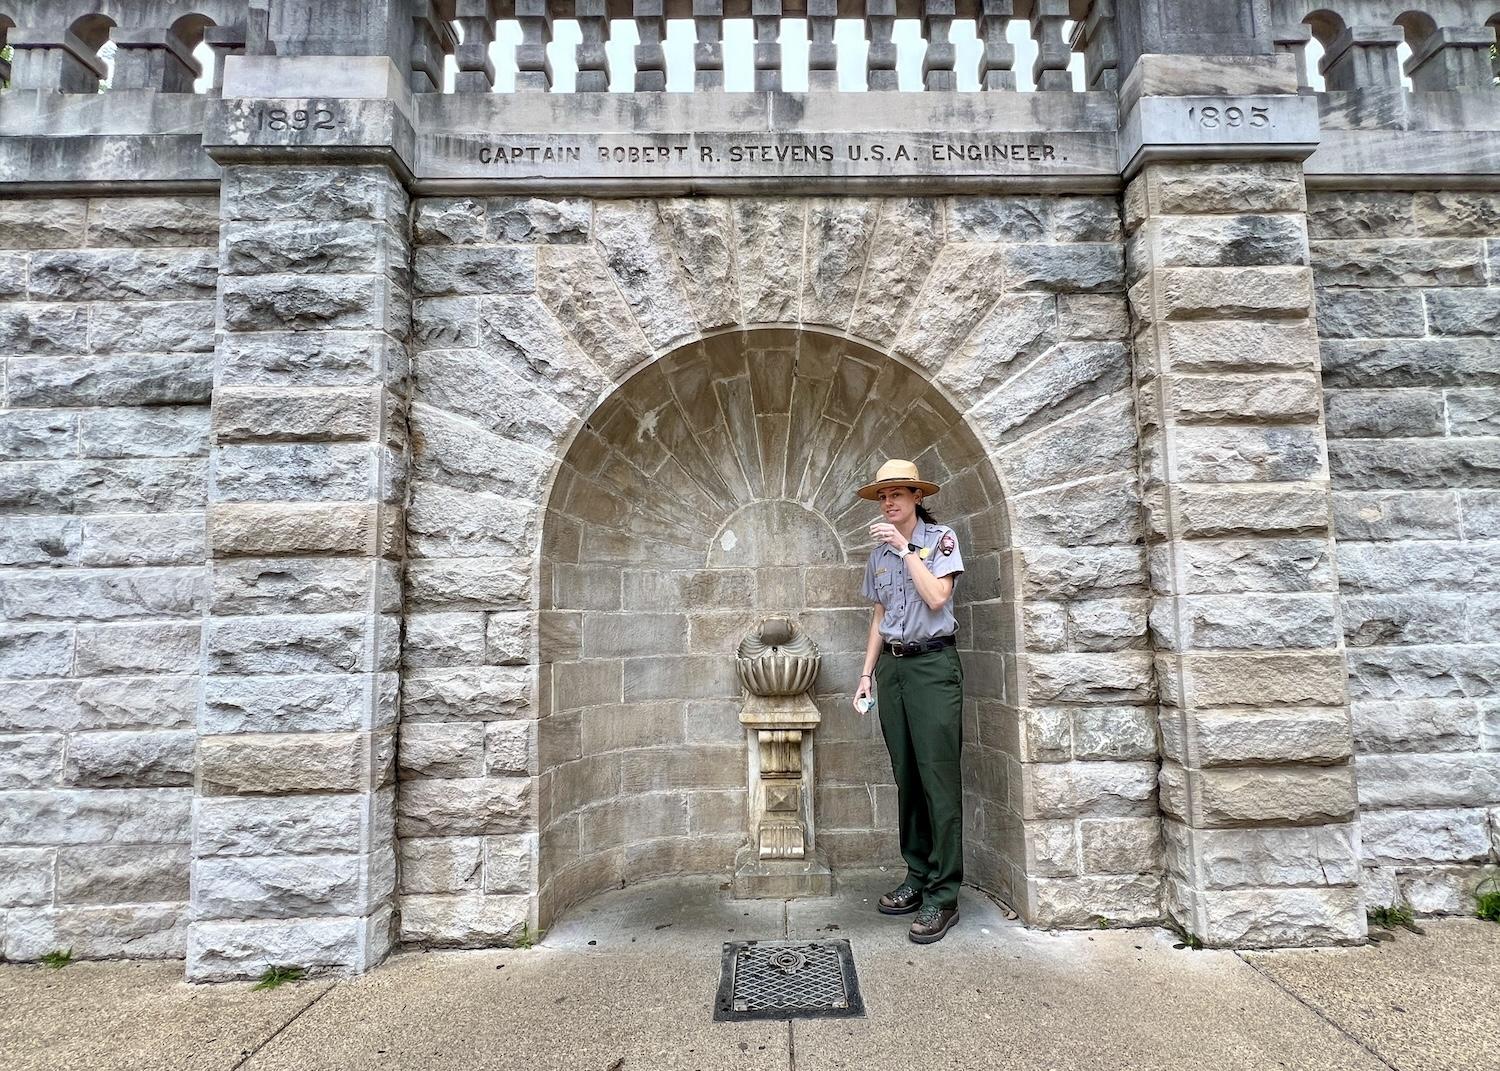 Hot Springs National Park ranger Kendra Barat offers drinks of thermal water from what's known as the "shell fountain" behind Bathhouse Row.